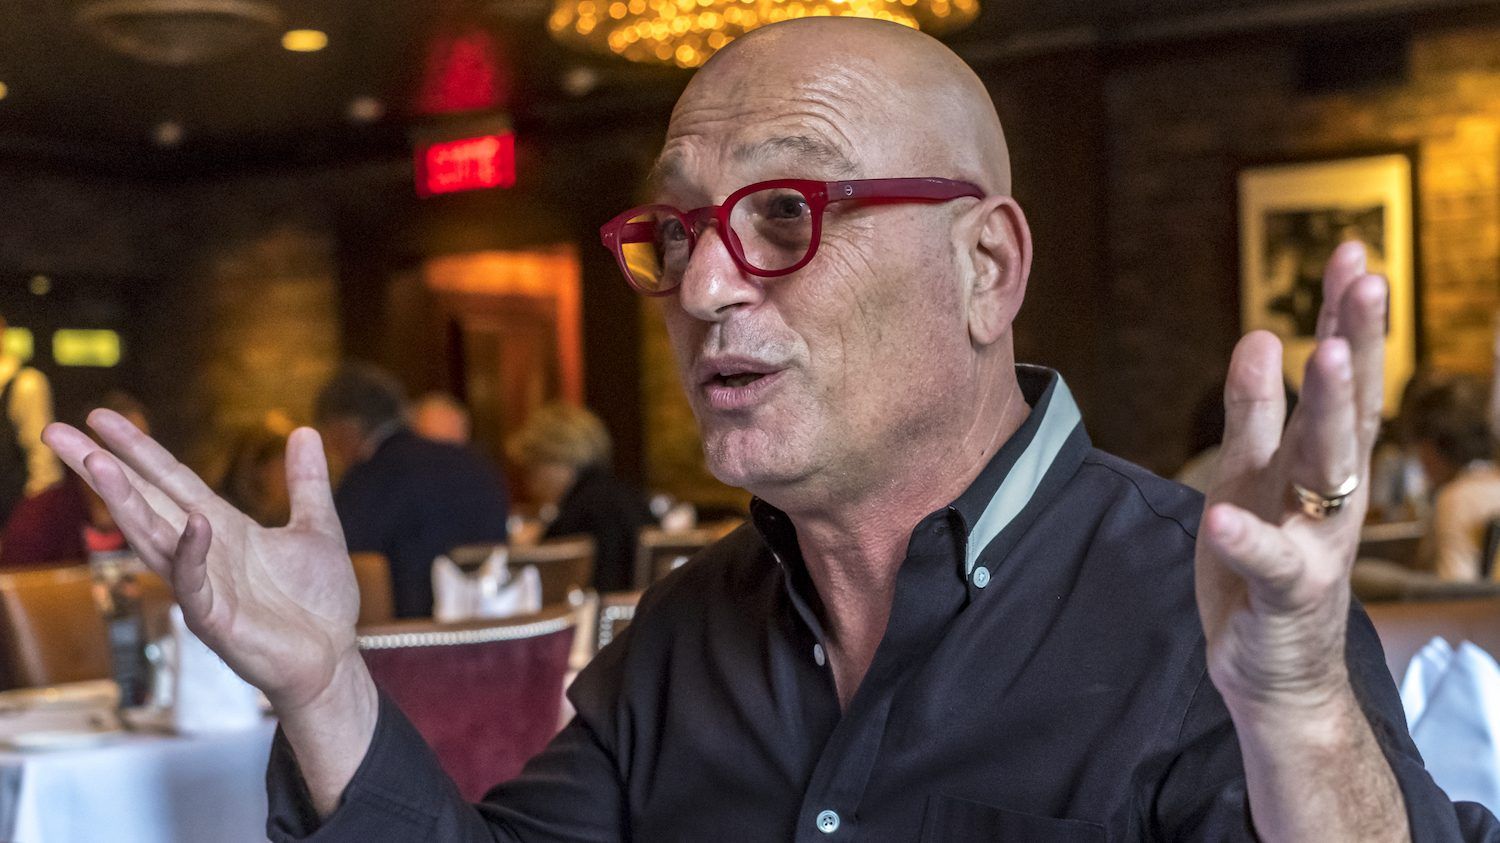 Canadian comedian Howie Mandel, new co-owner of Just for Laughs, at Moishes Steakhouse in Montreal, on Tuesday, May 15, 2018. (Dave Sidaway / MONTREAL GAZETTE) 